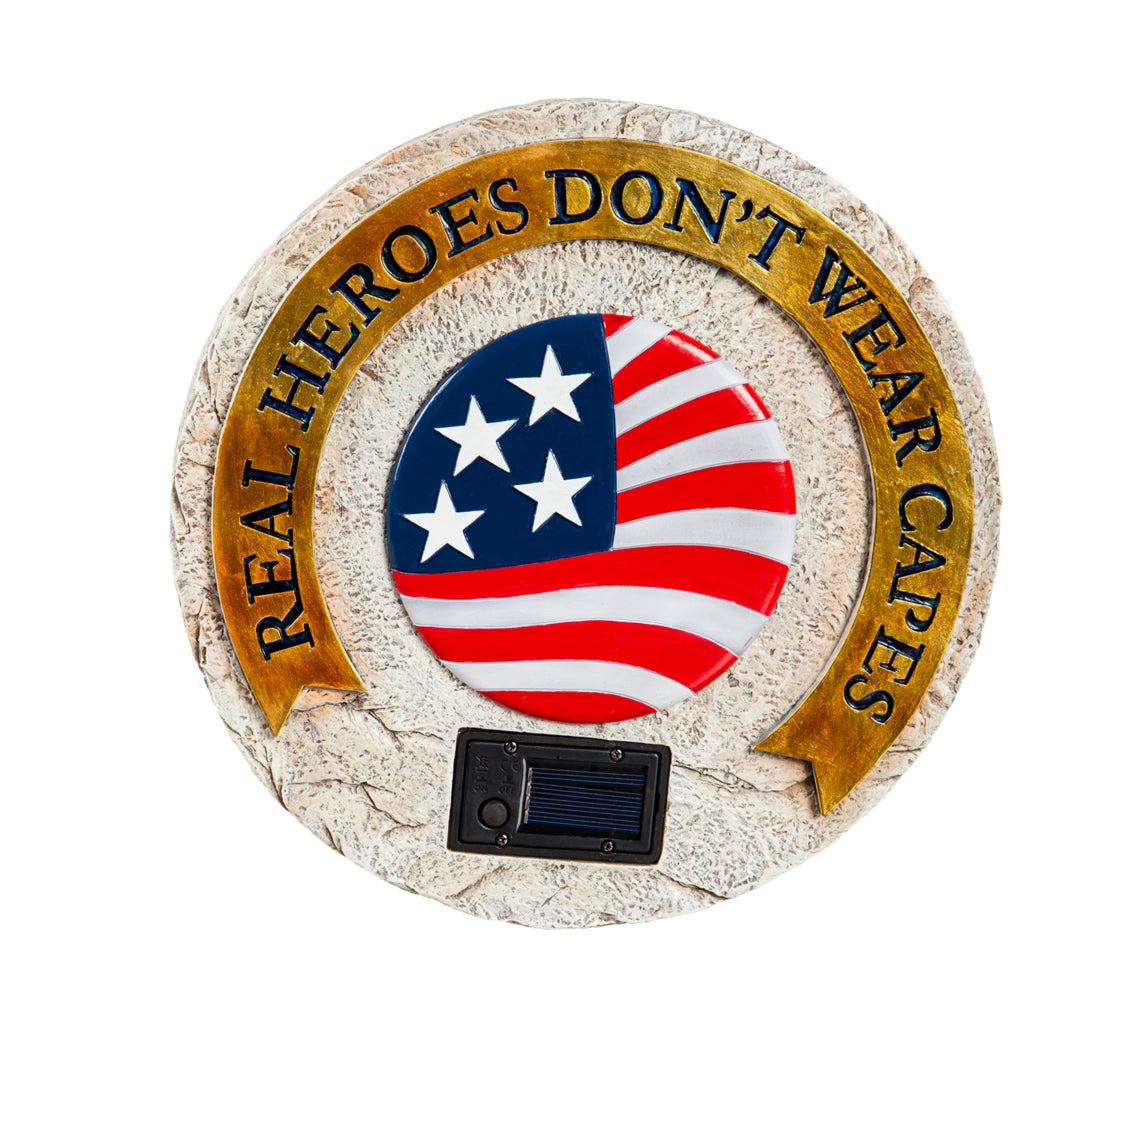 Real Heroes Don't Wear Capes Solar Garden Stone, Military/Americana